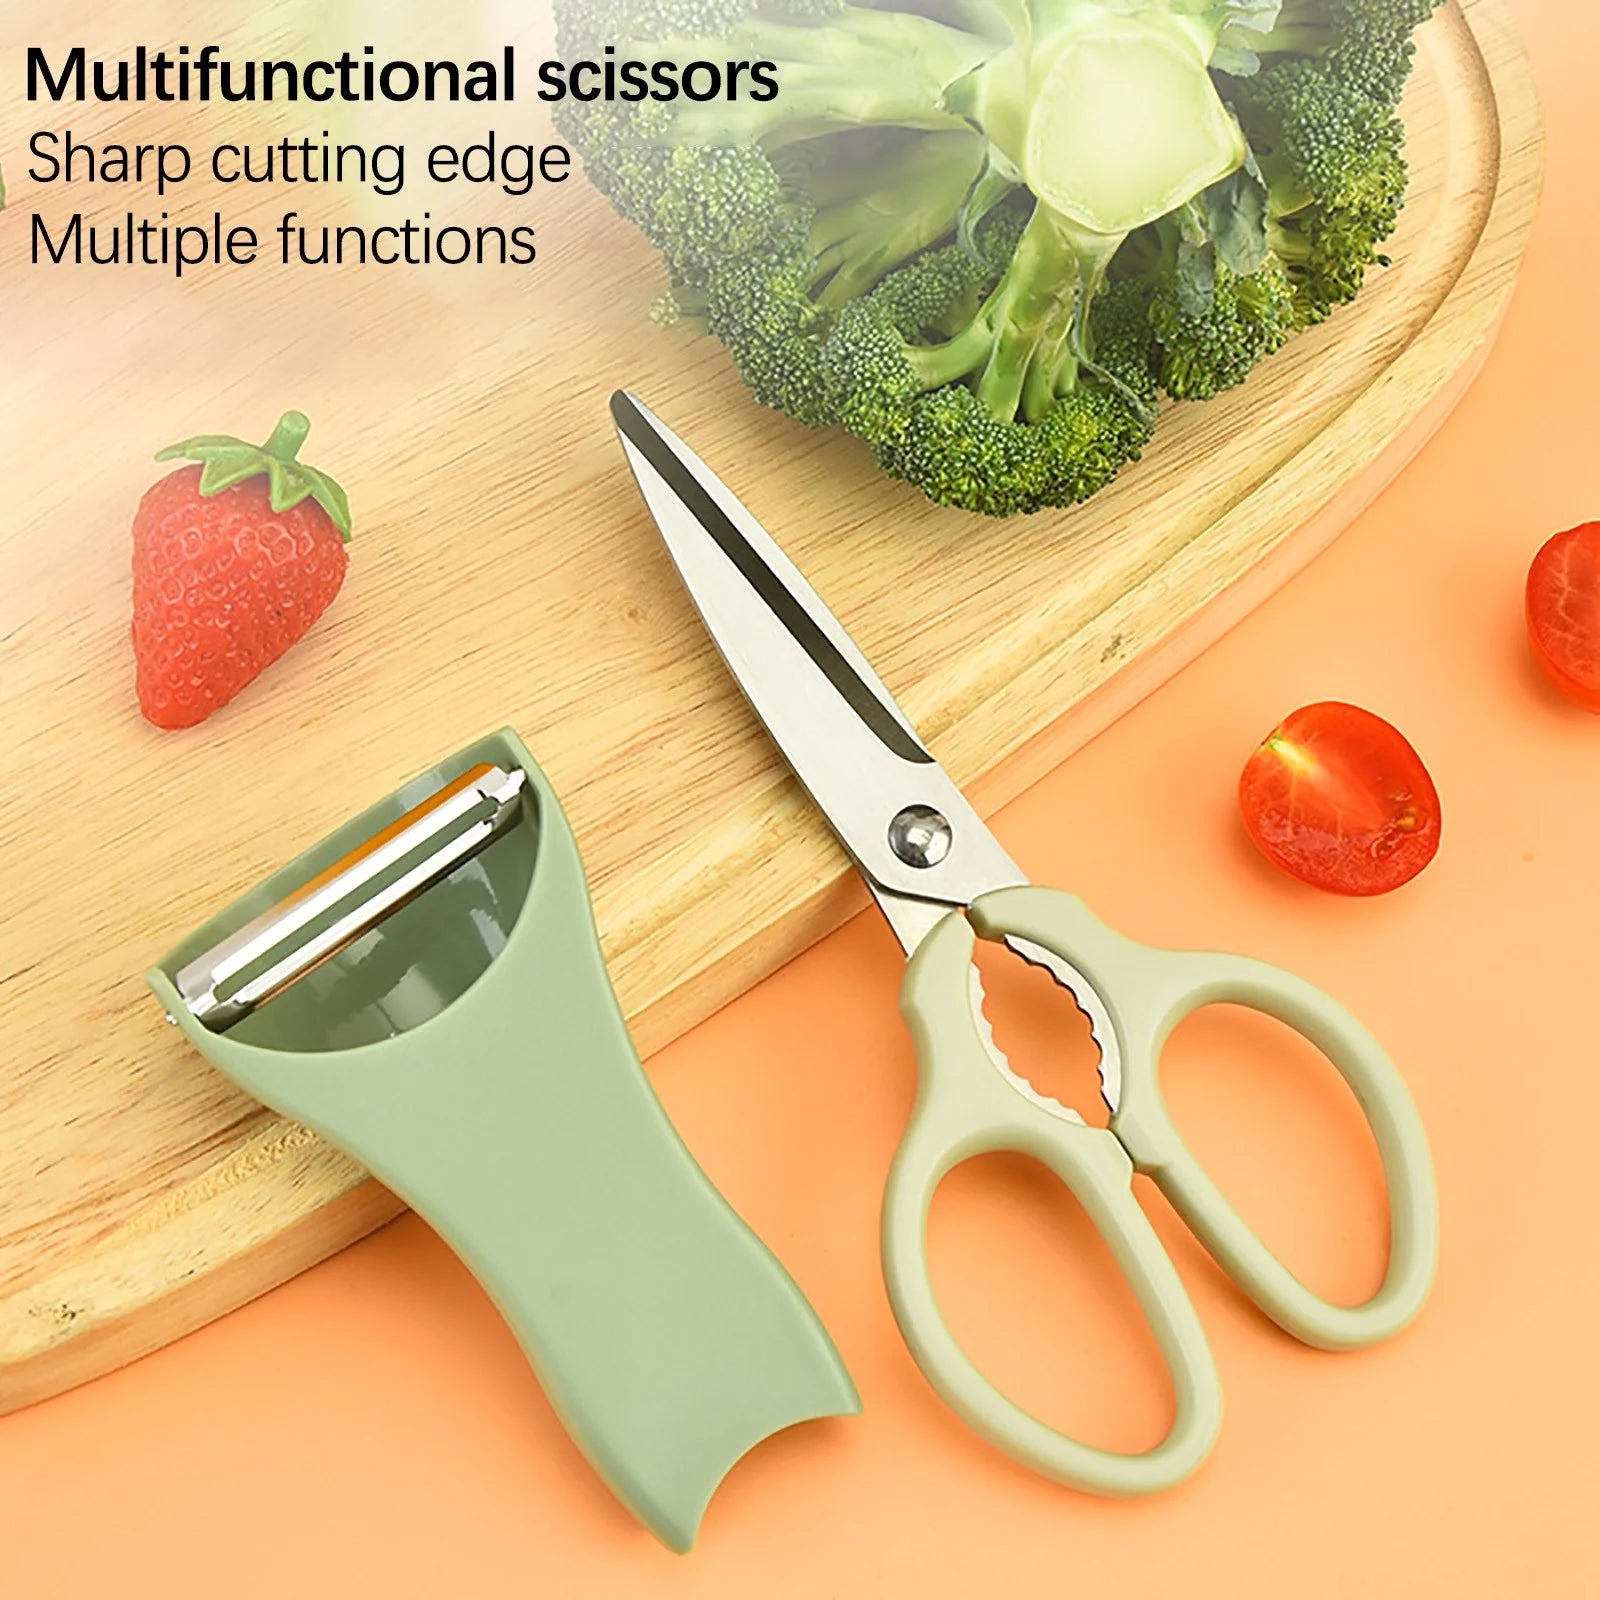 Kitchen Scissor Peelar Set, 3 In 1 Melon Planer, Wovilon Scissor And Peelar, Multipurpose Food Shear, Practical Kitchen Cutting Tool, Heavy Duty Meat Poultry,  Stainless Steel Utility for Ultra Sharp Seafood Herb Serrated